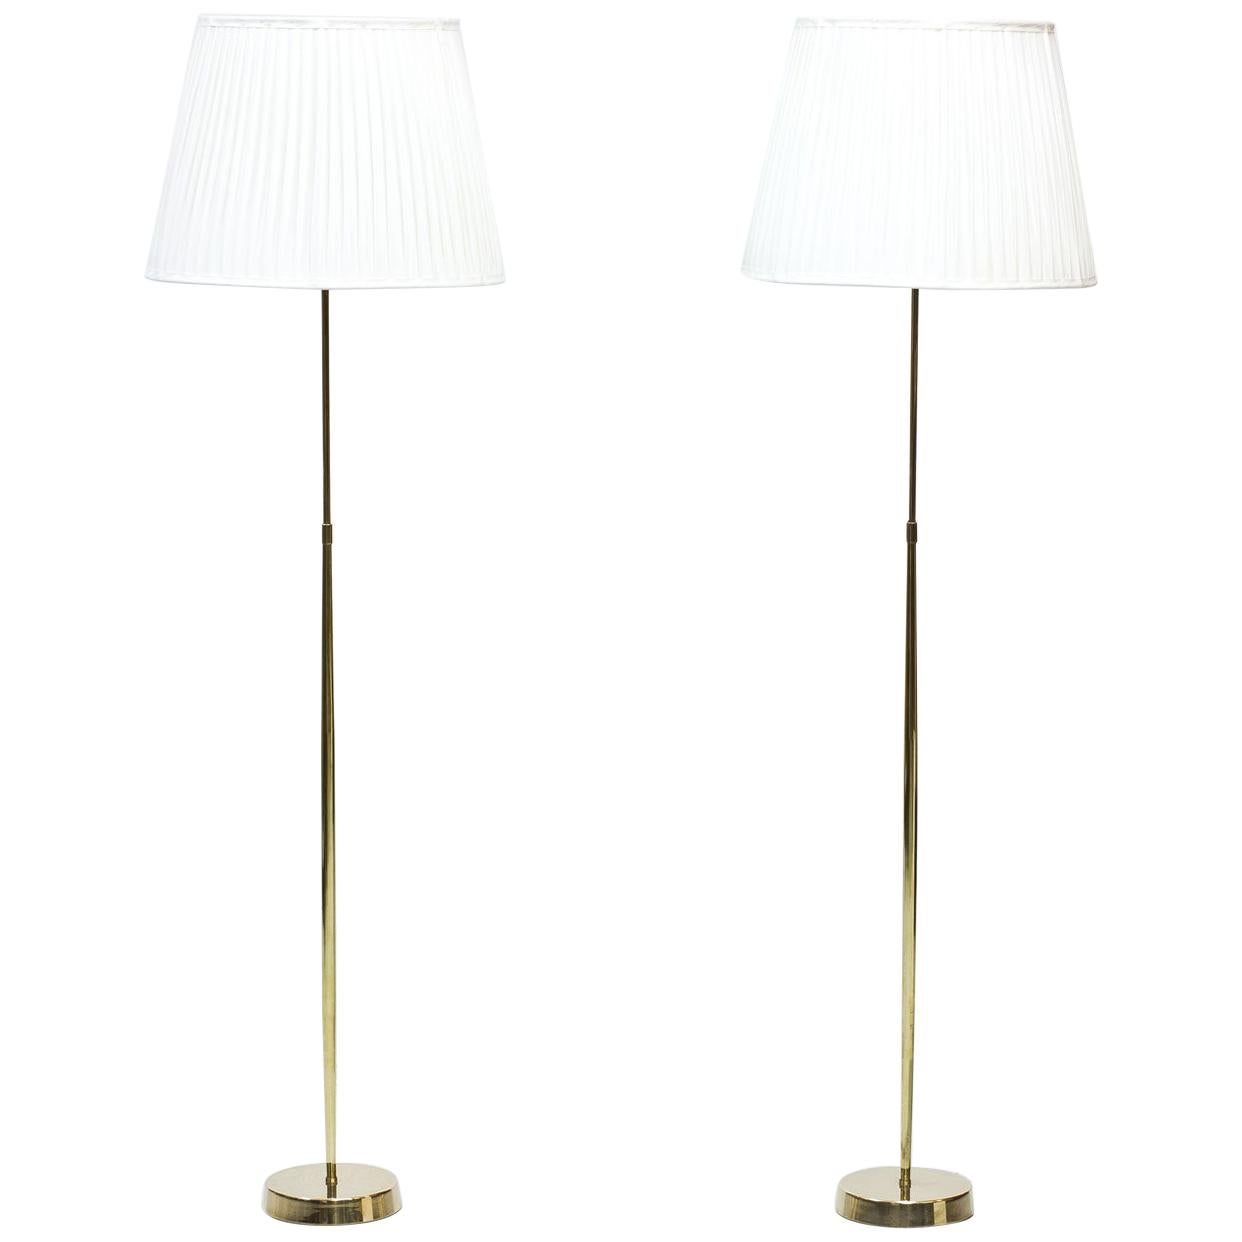 Pair of floor lamps produced by ASEA Belysning in Sweden during the 1950s. Polished brass stem. Hand pleated lamp shades in off-white chintz fabric. Rewired. Light switch on the brass.
fittings. Signed on the bottom.